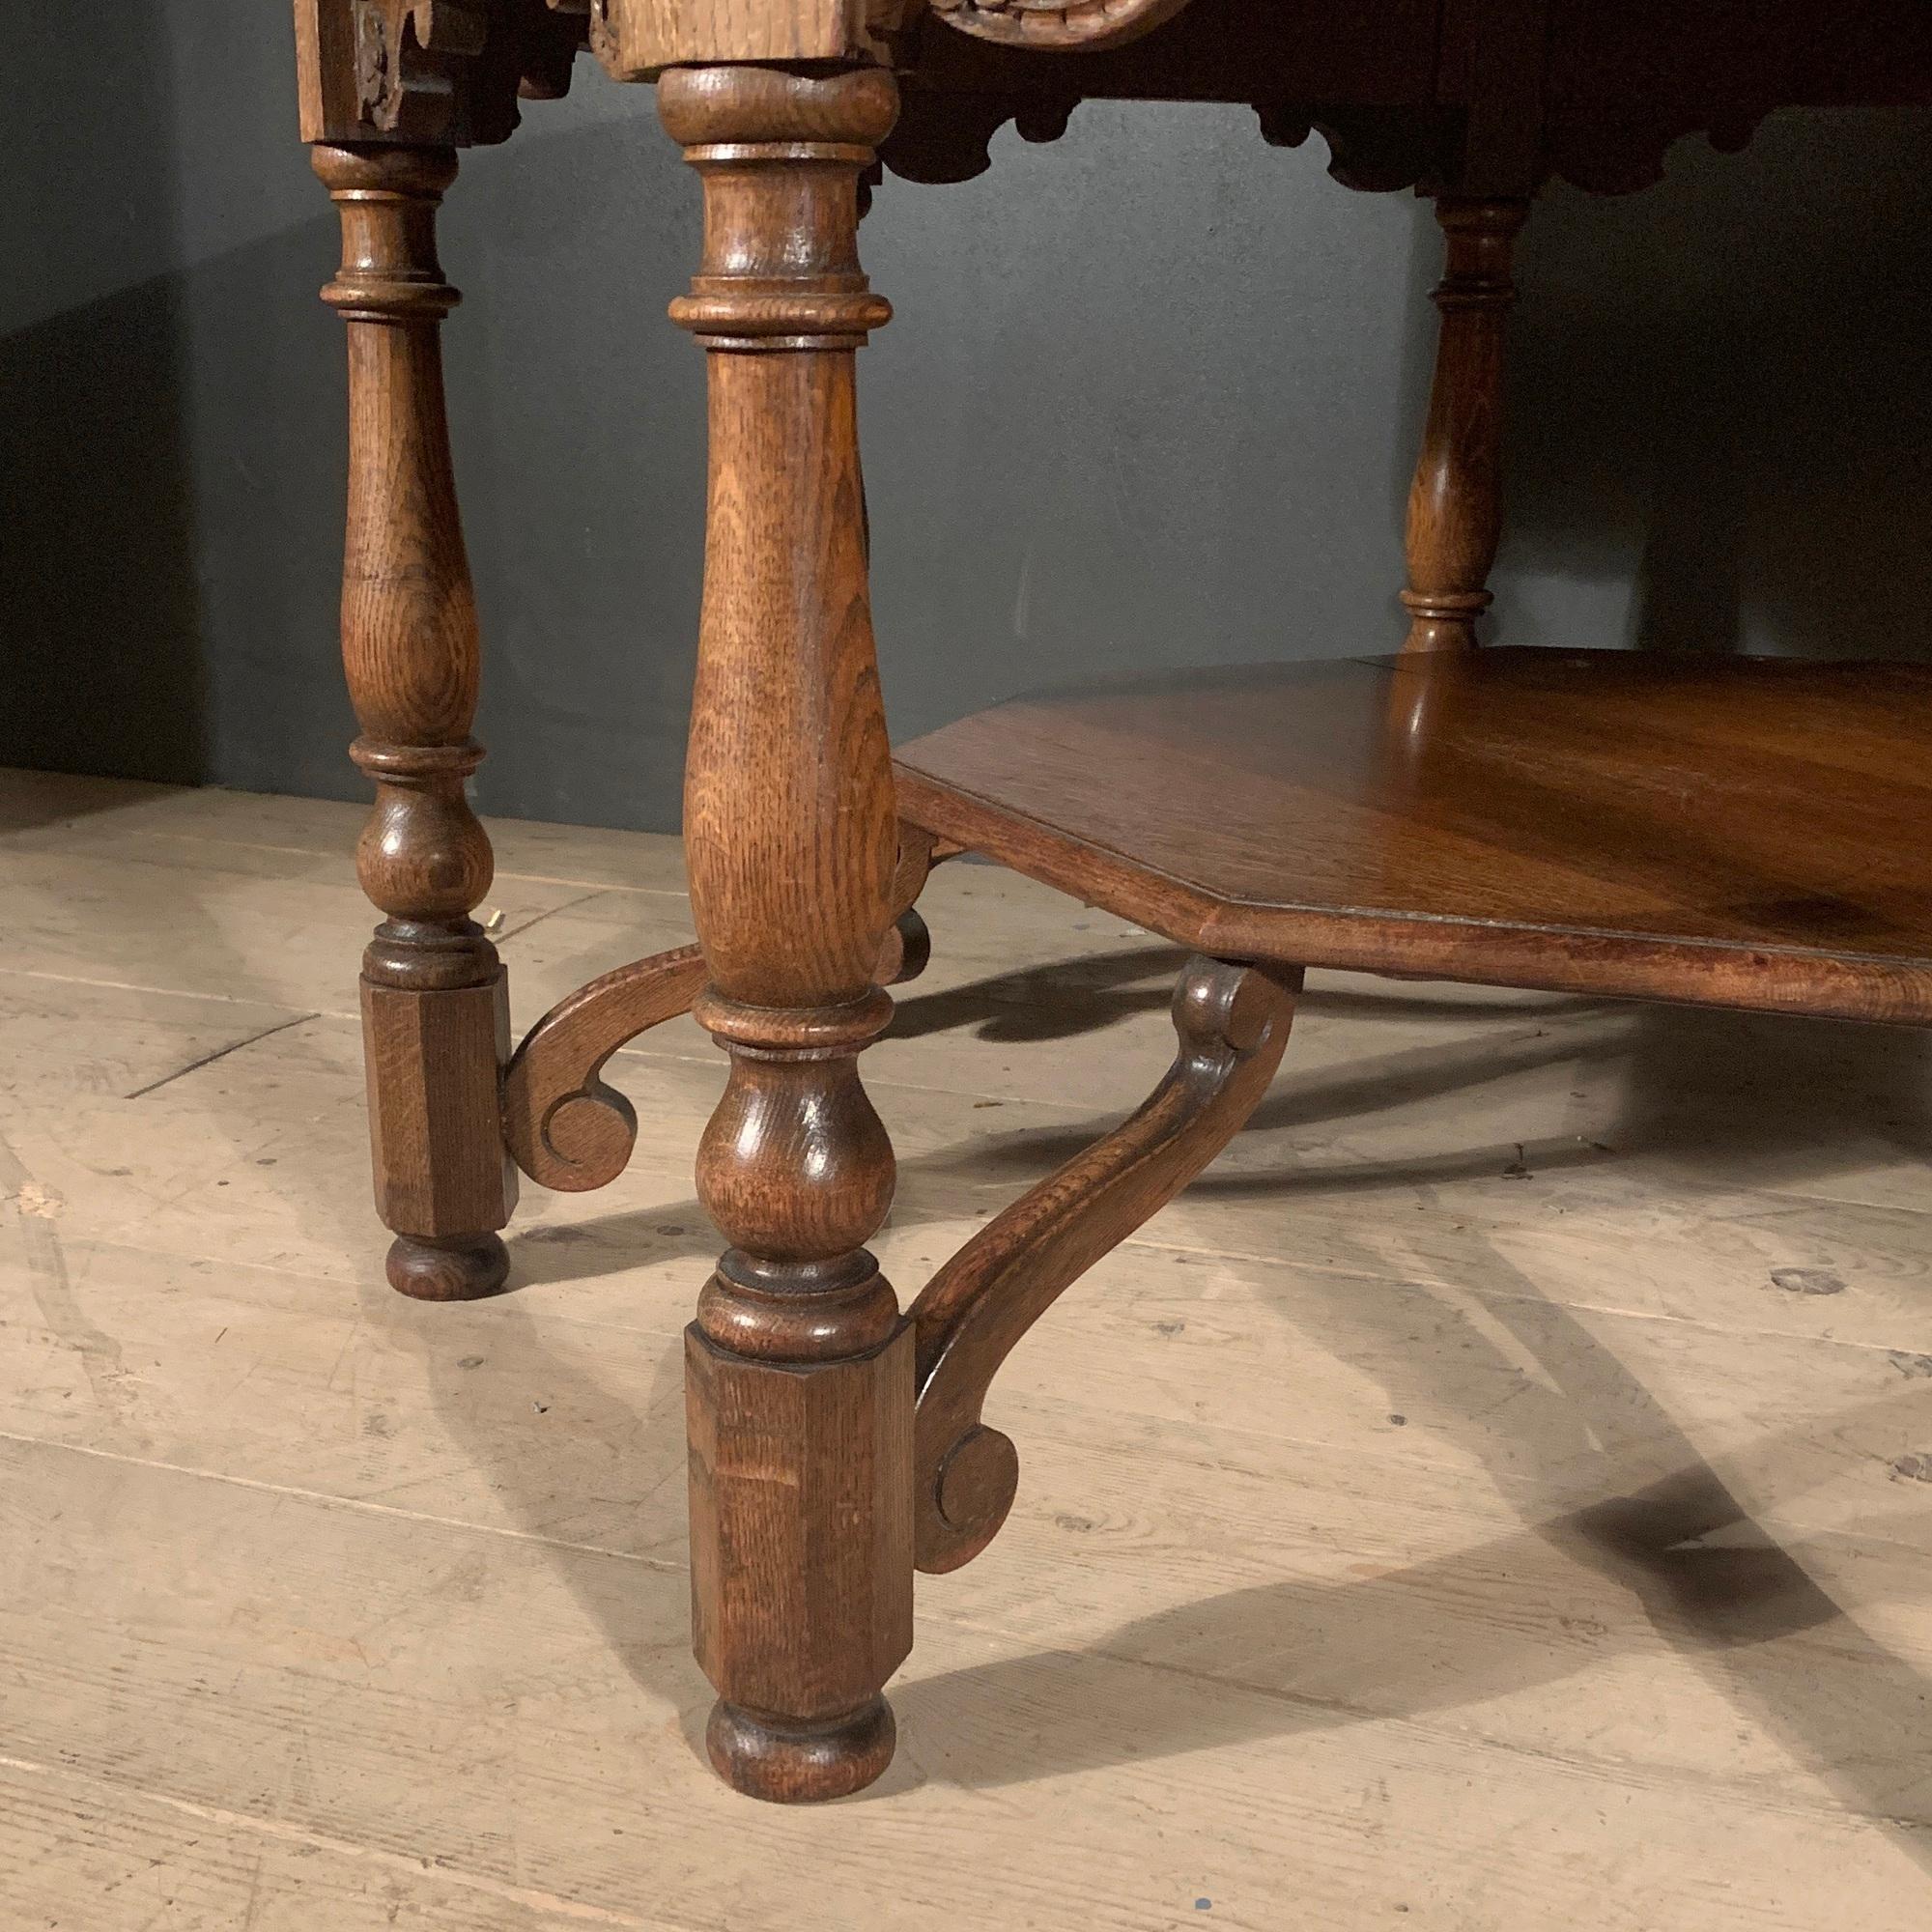 English Country House Centre Table